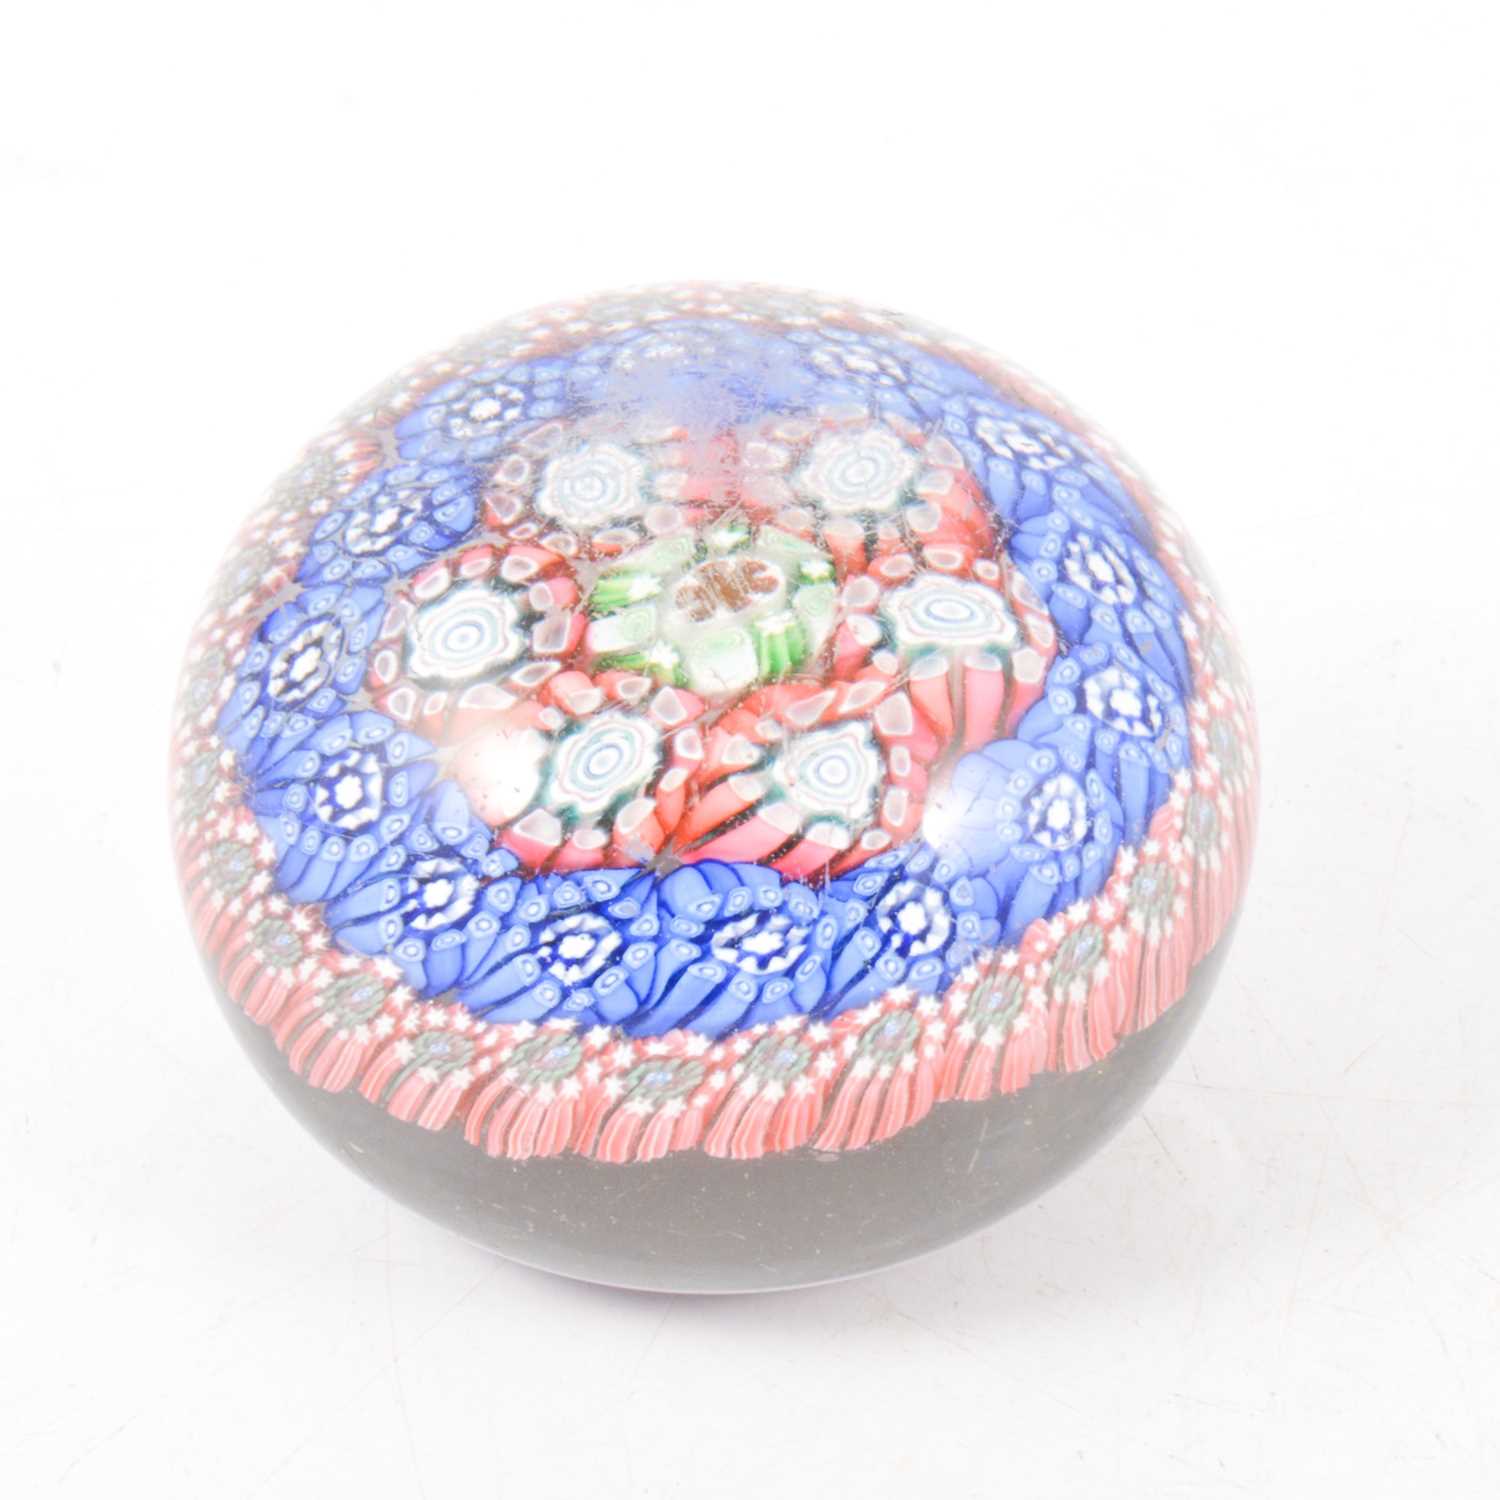 Clichy glass paperweight,